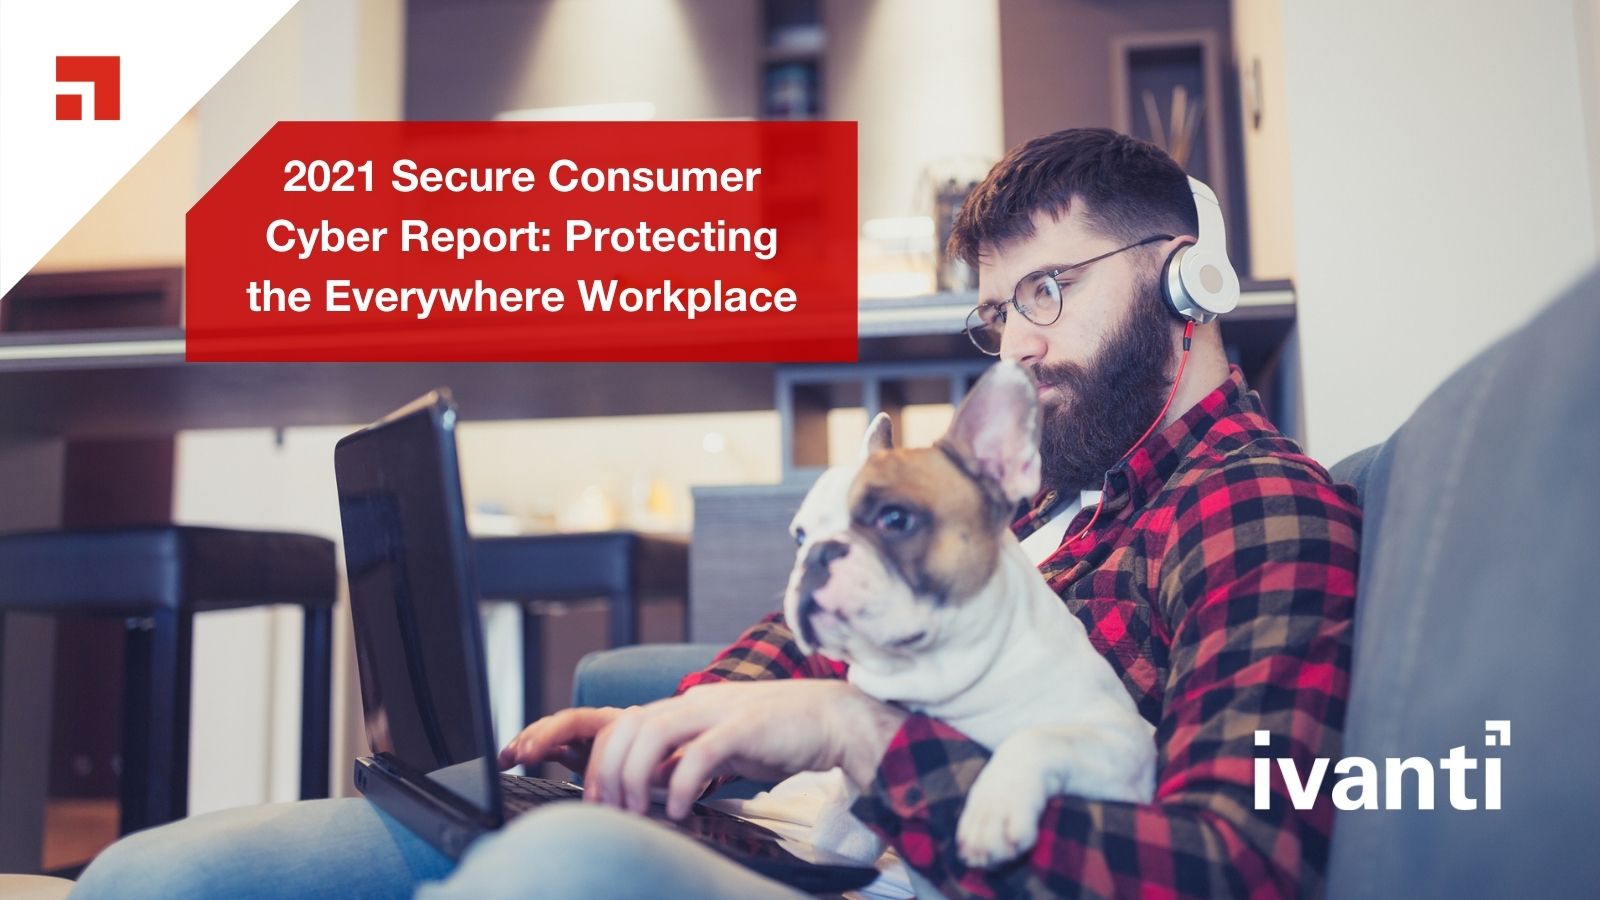 2021 Secure Consumer Cyber Report: Protecting the Everywhere Workplace 